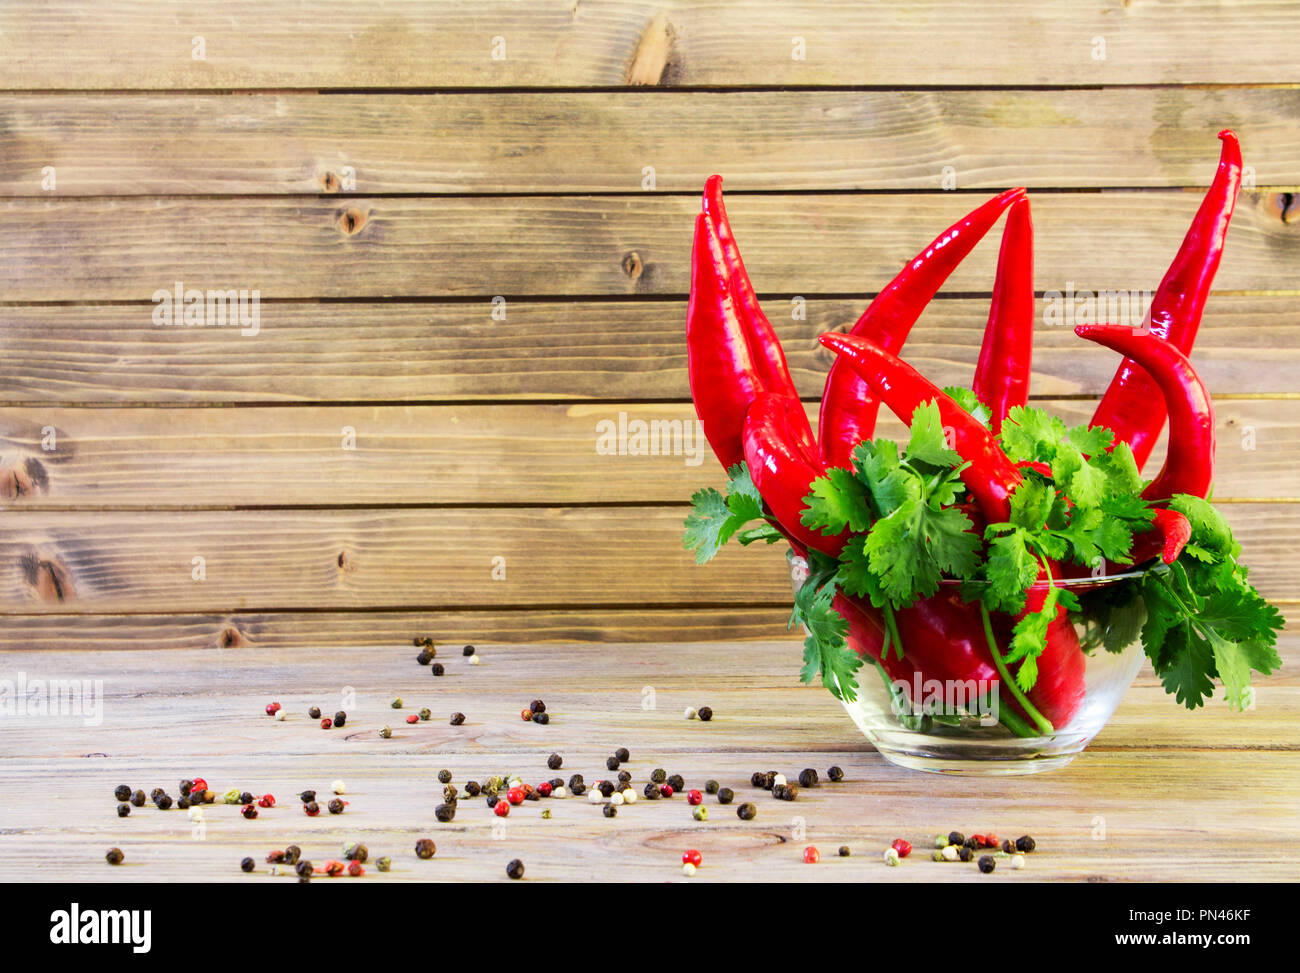 Red chili peper on wooden background/ Close up Stock Photo